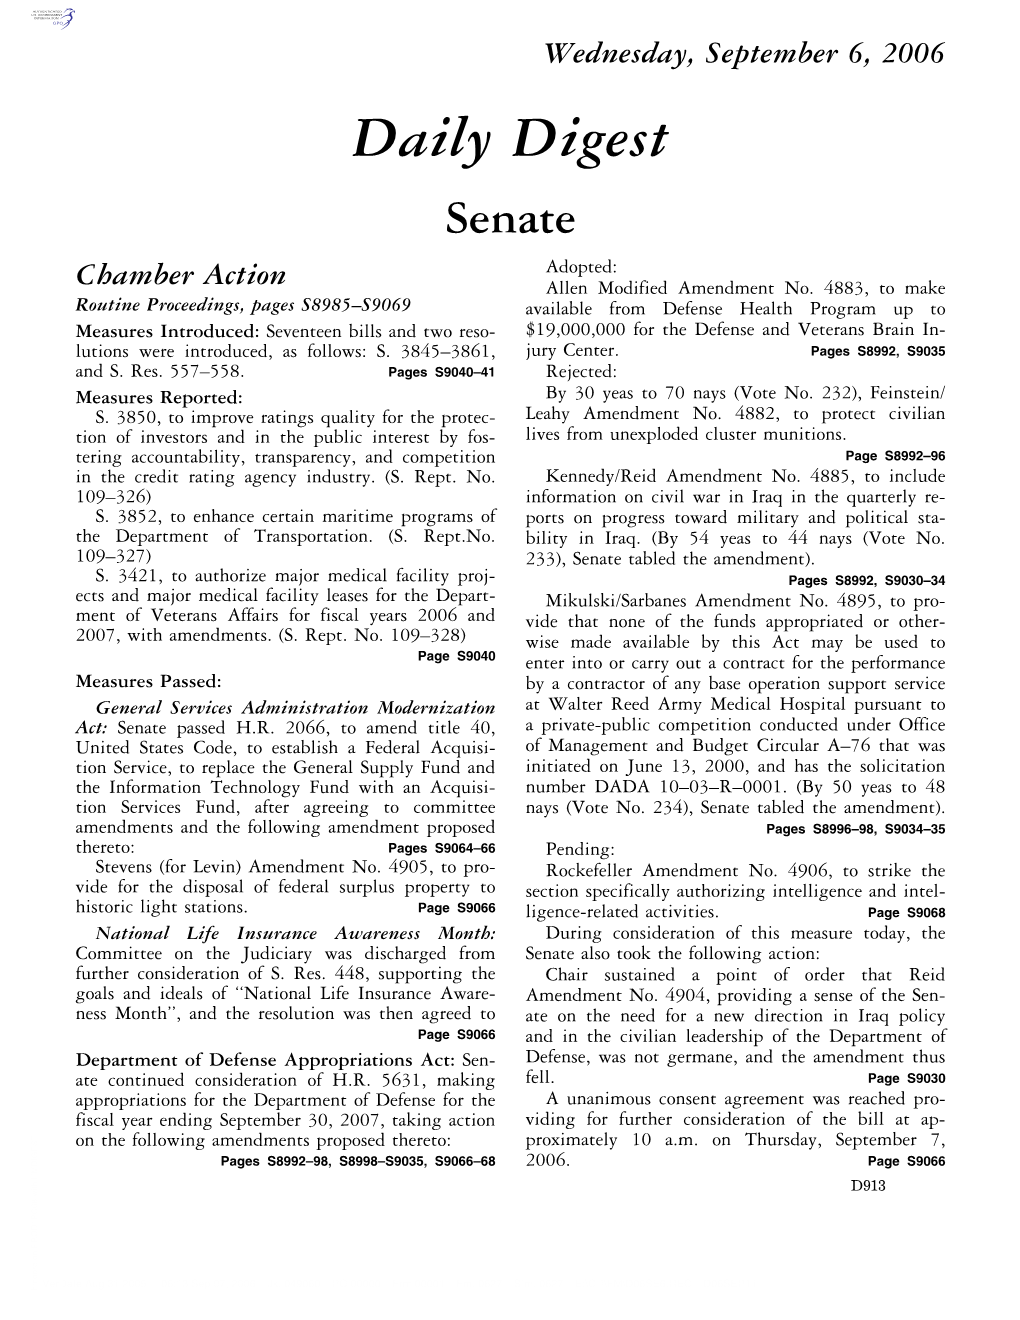 Daily Digest Senate Adopted: Chamber Action Allen Modified Amendment No